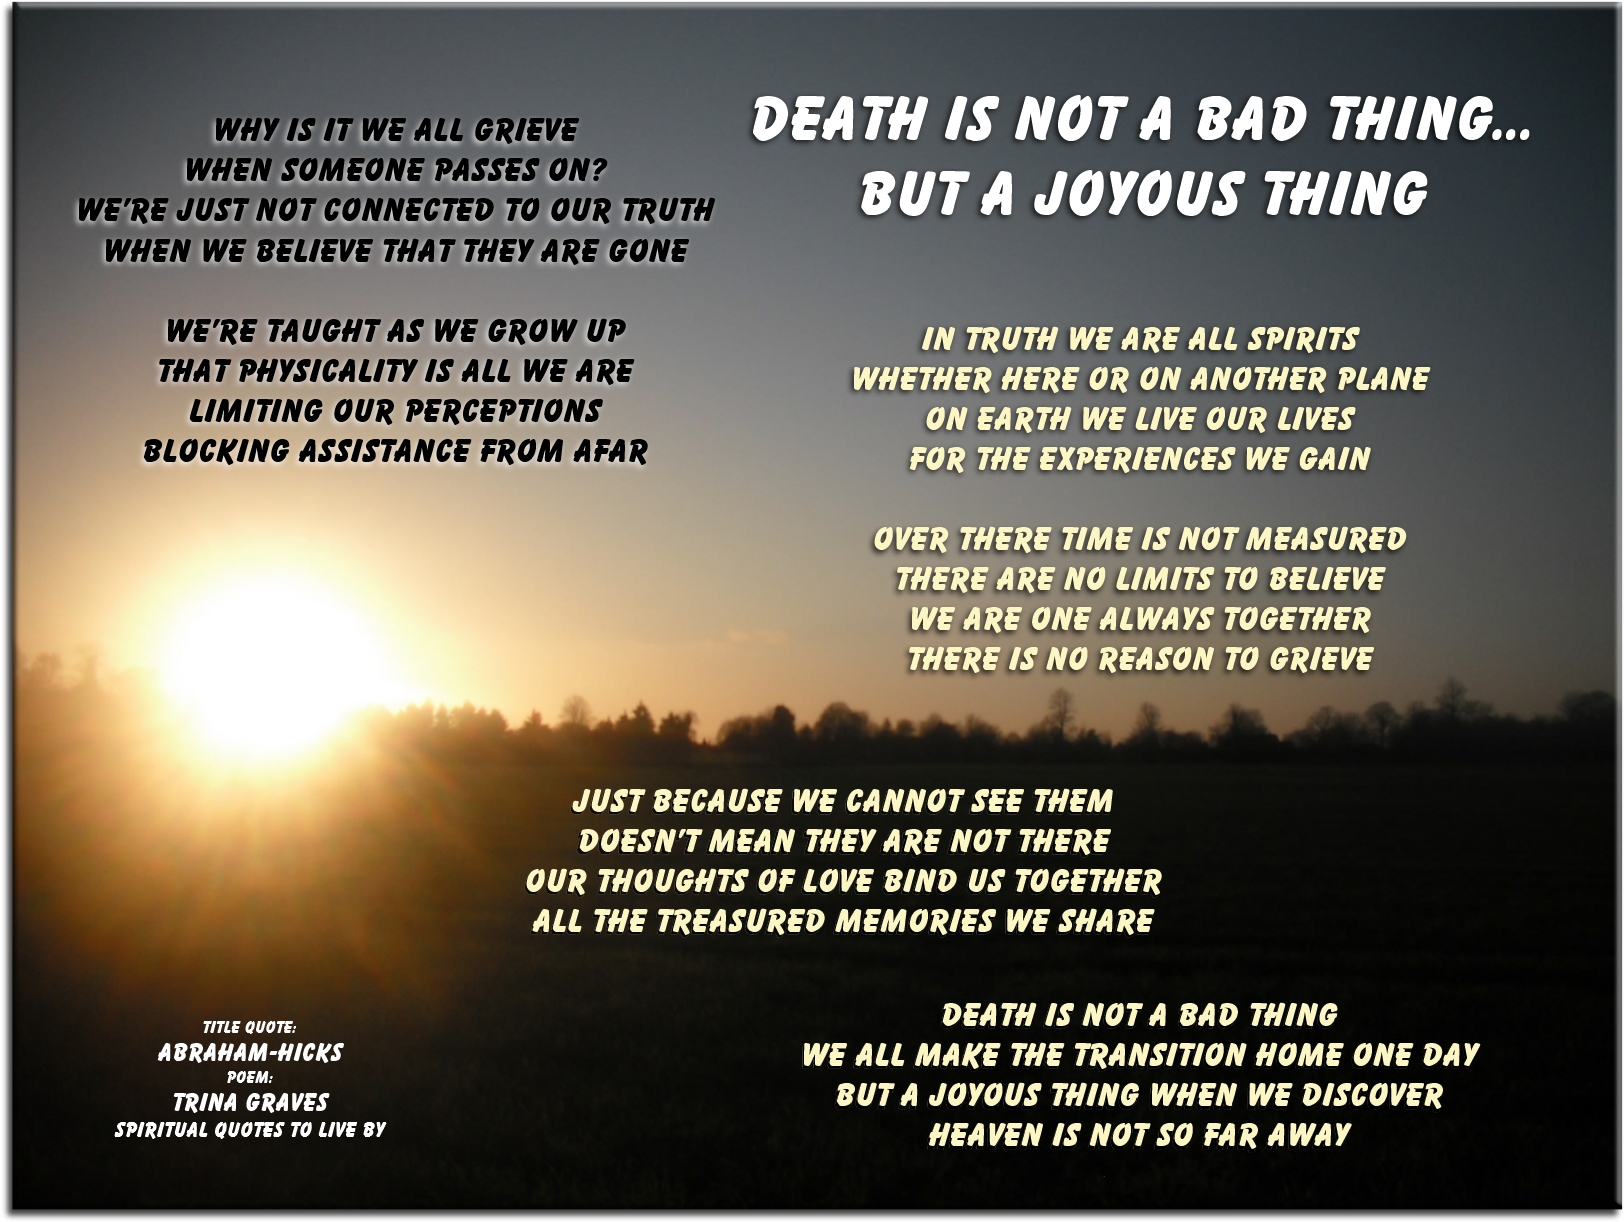 Death Is Not A Bad Thing - sympathy poem by Trina Graves of Spiritual Quotes To Live By